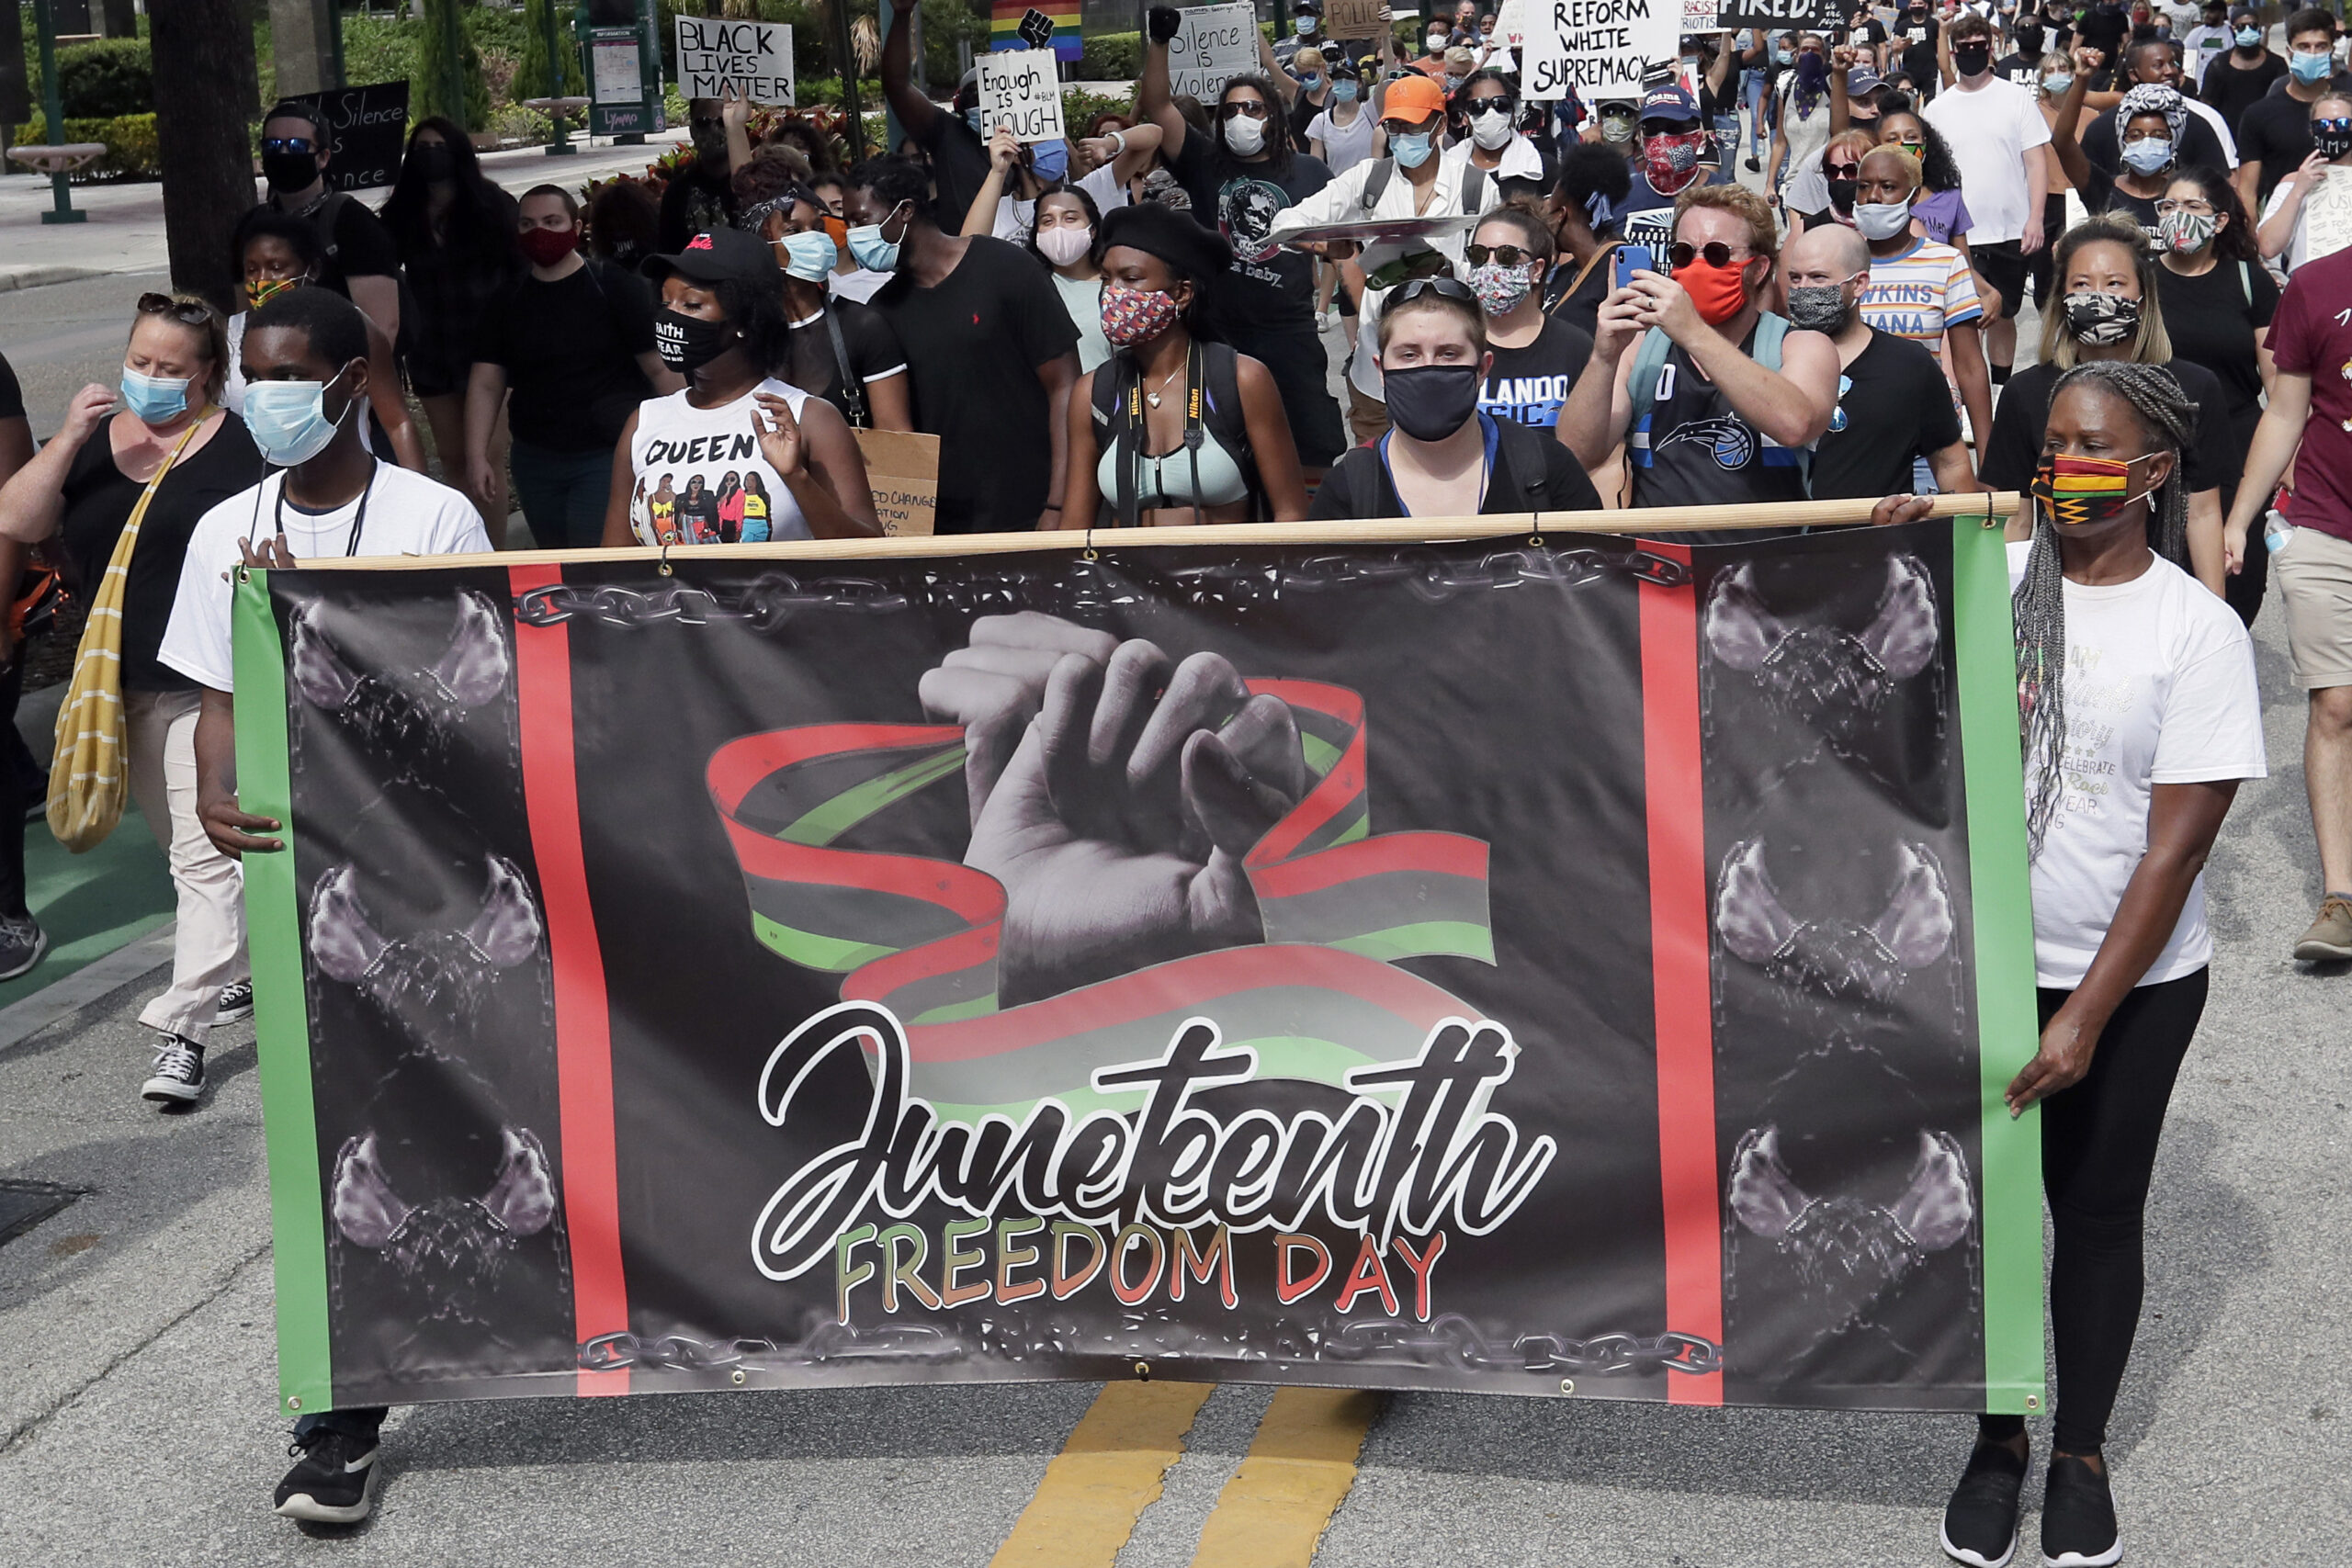 demonstrators march through downtown Orlando, Fla., during a Juneteenth event